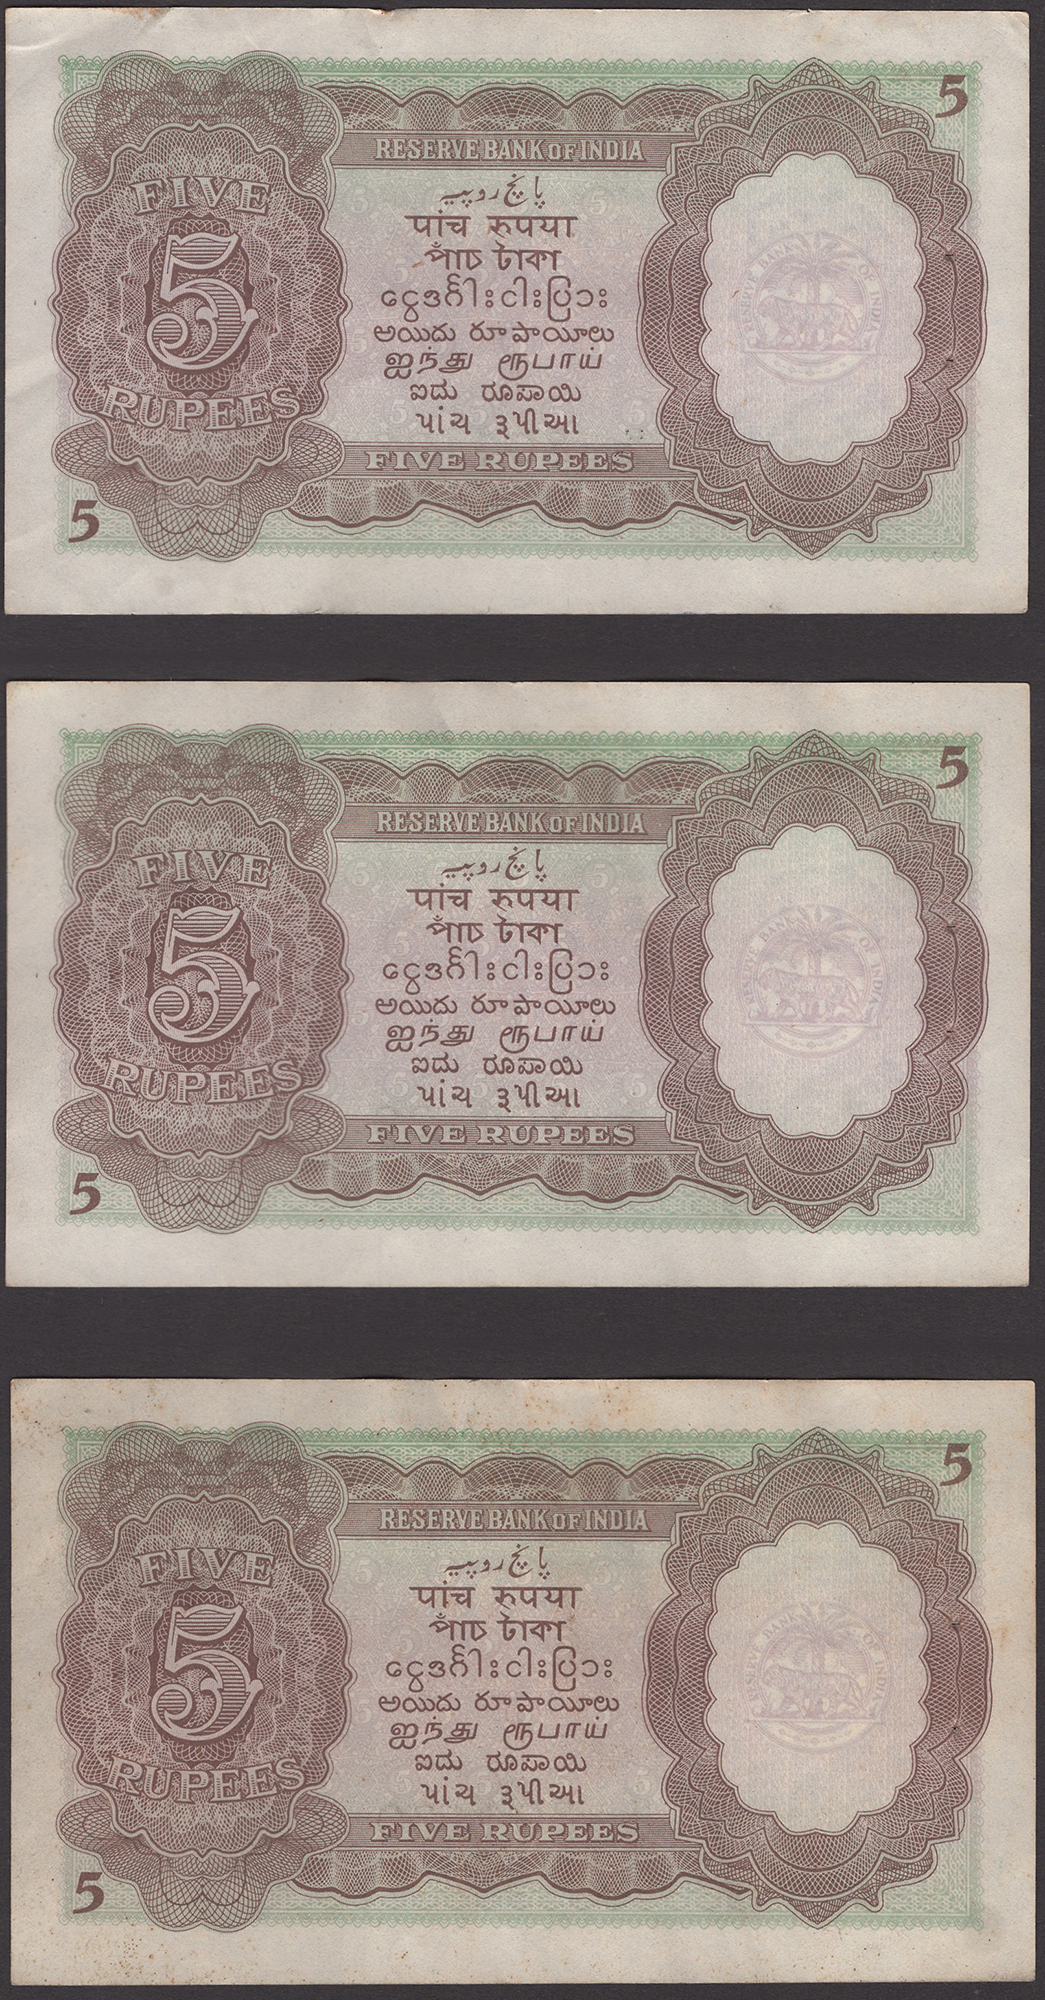 Reserve Bank of India, 5 Rupees (6), ND (1937), consecutive serial numbers H/66 804124-26... - Image 4 of 4